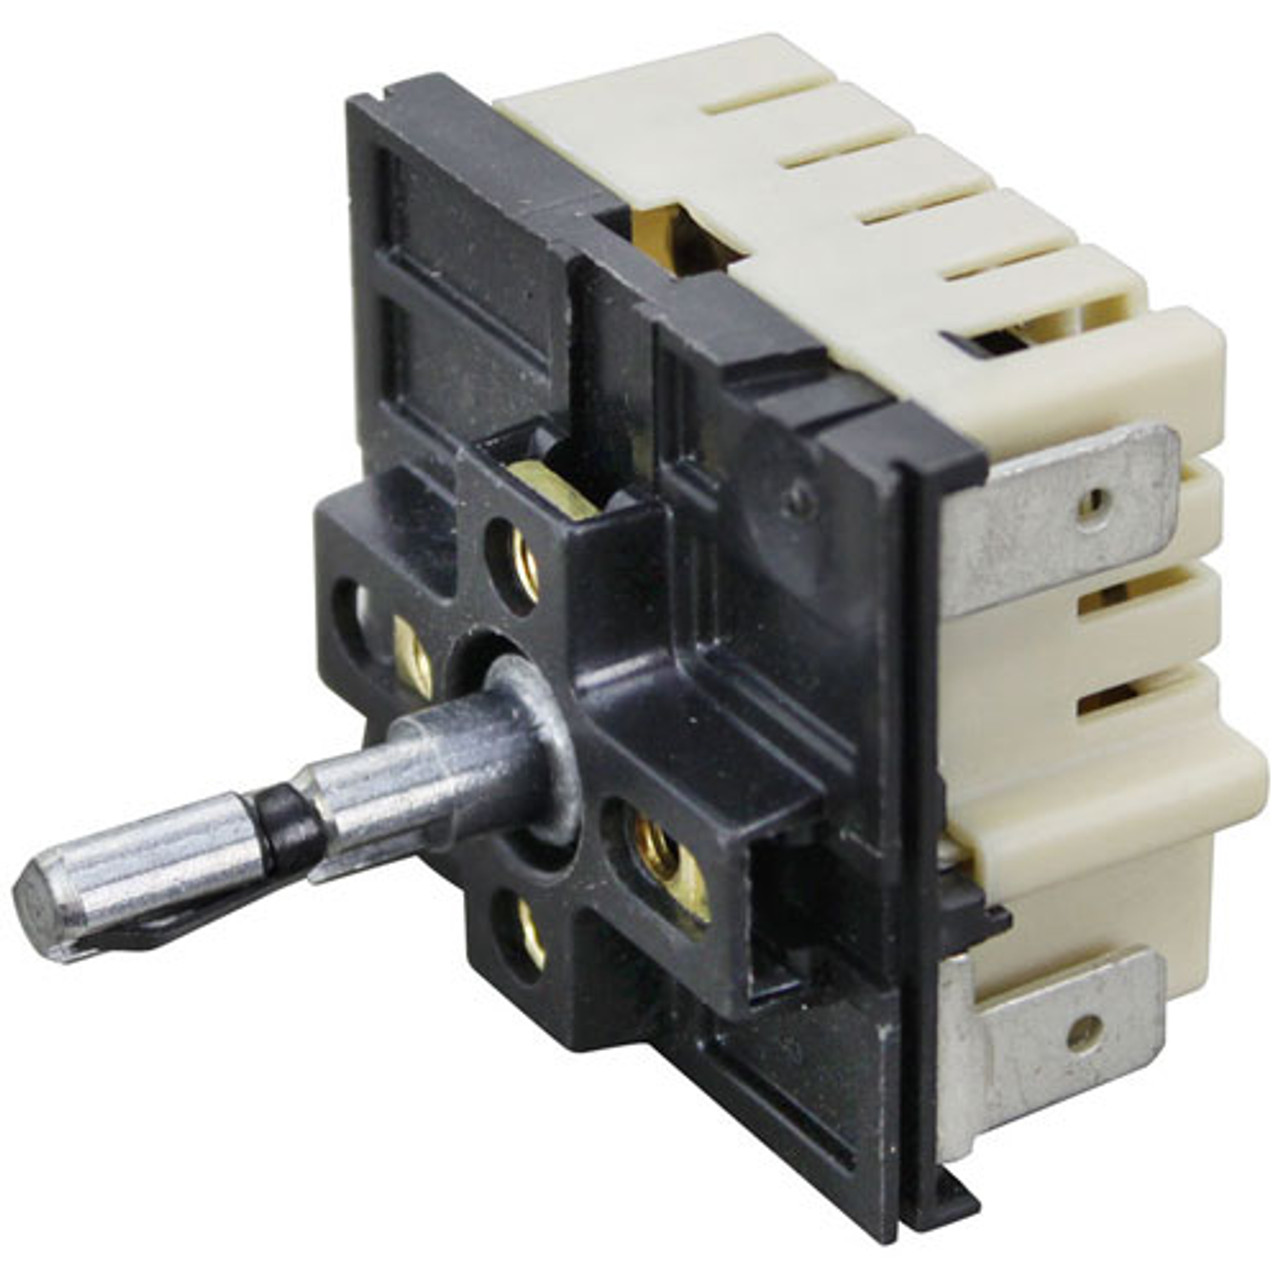 Infinite Heat Switch - Replacement Part For FWE TSTATINF1